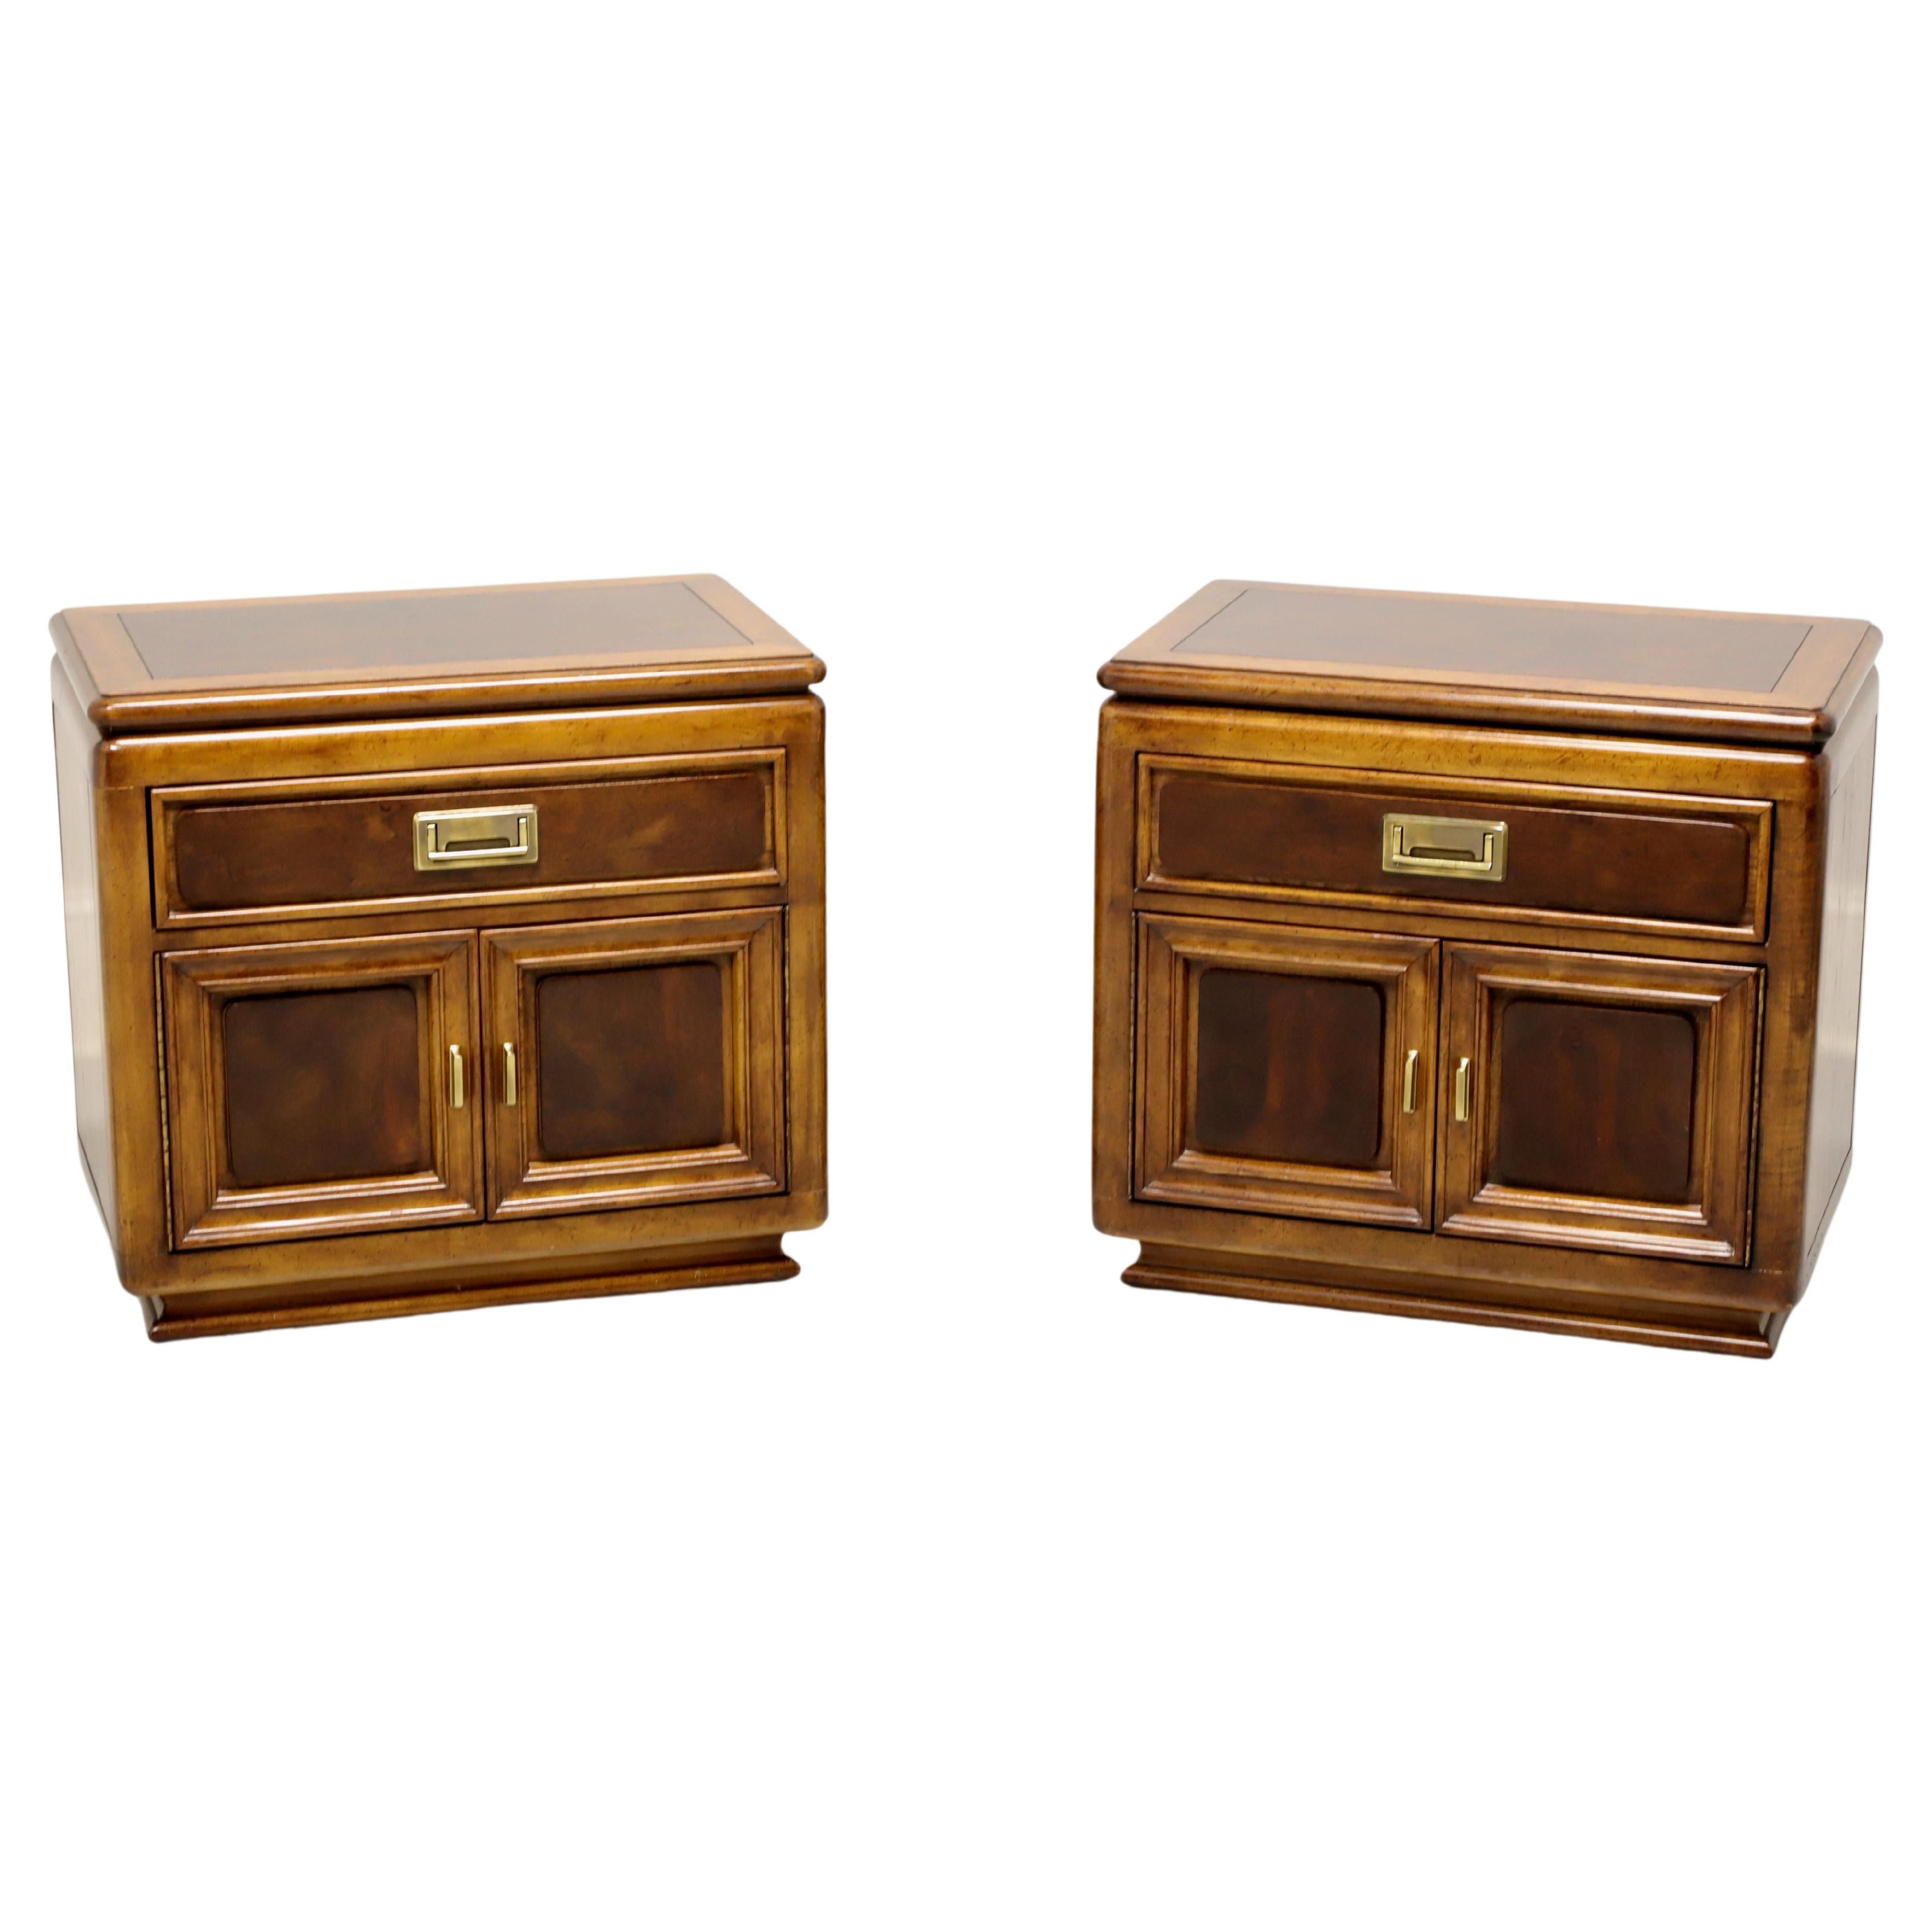 UNIQUE FURNITURE Mid 20th Century Asian Style Nightstands - Pair